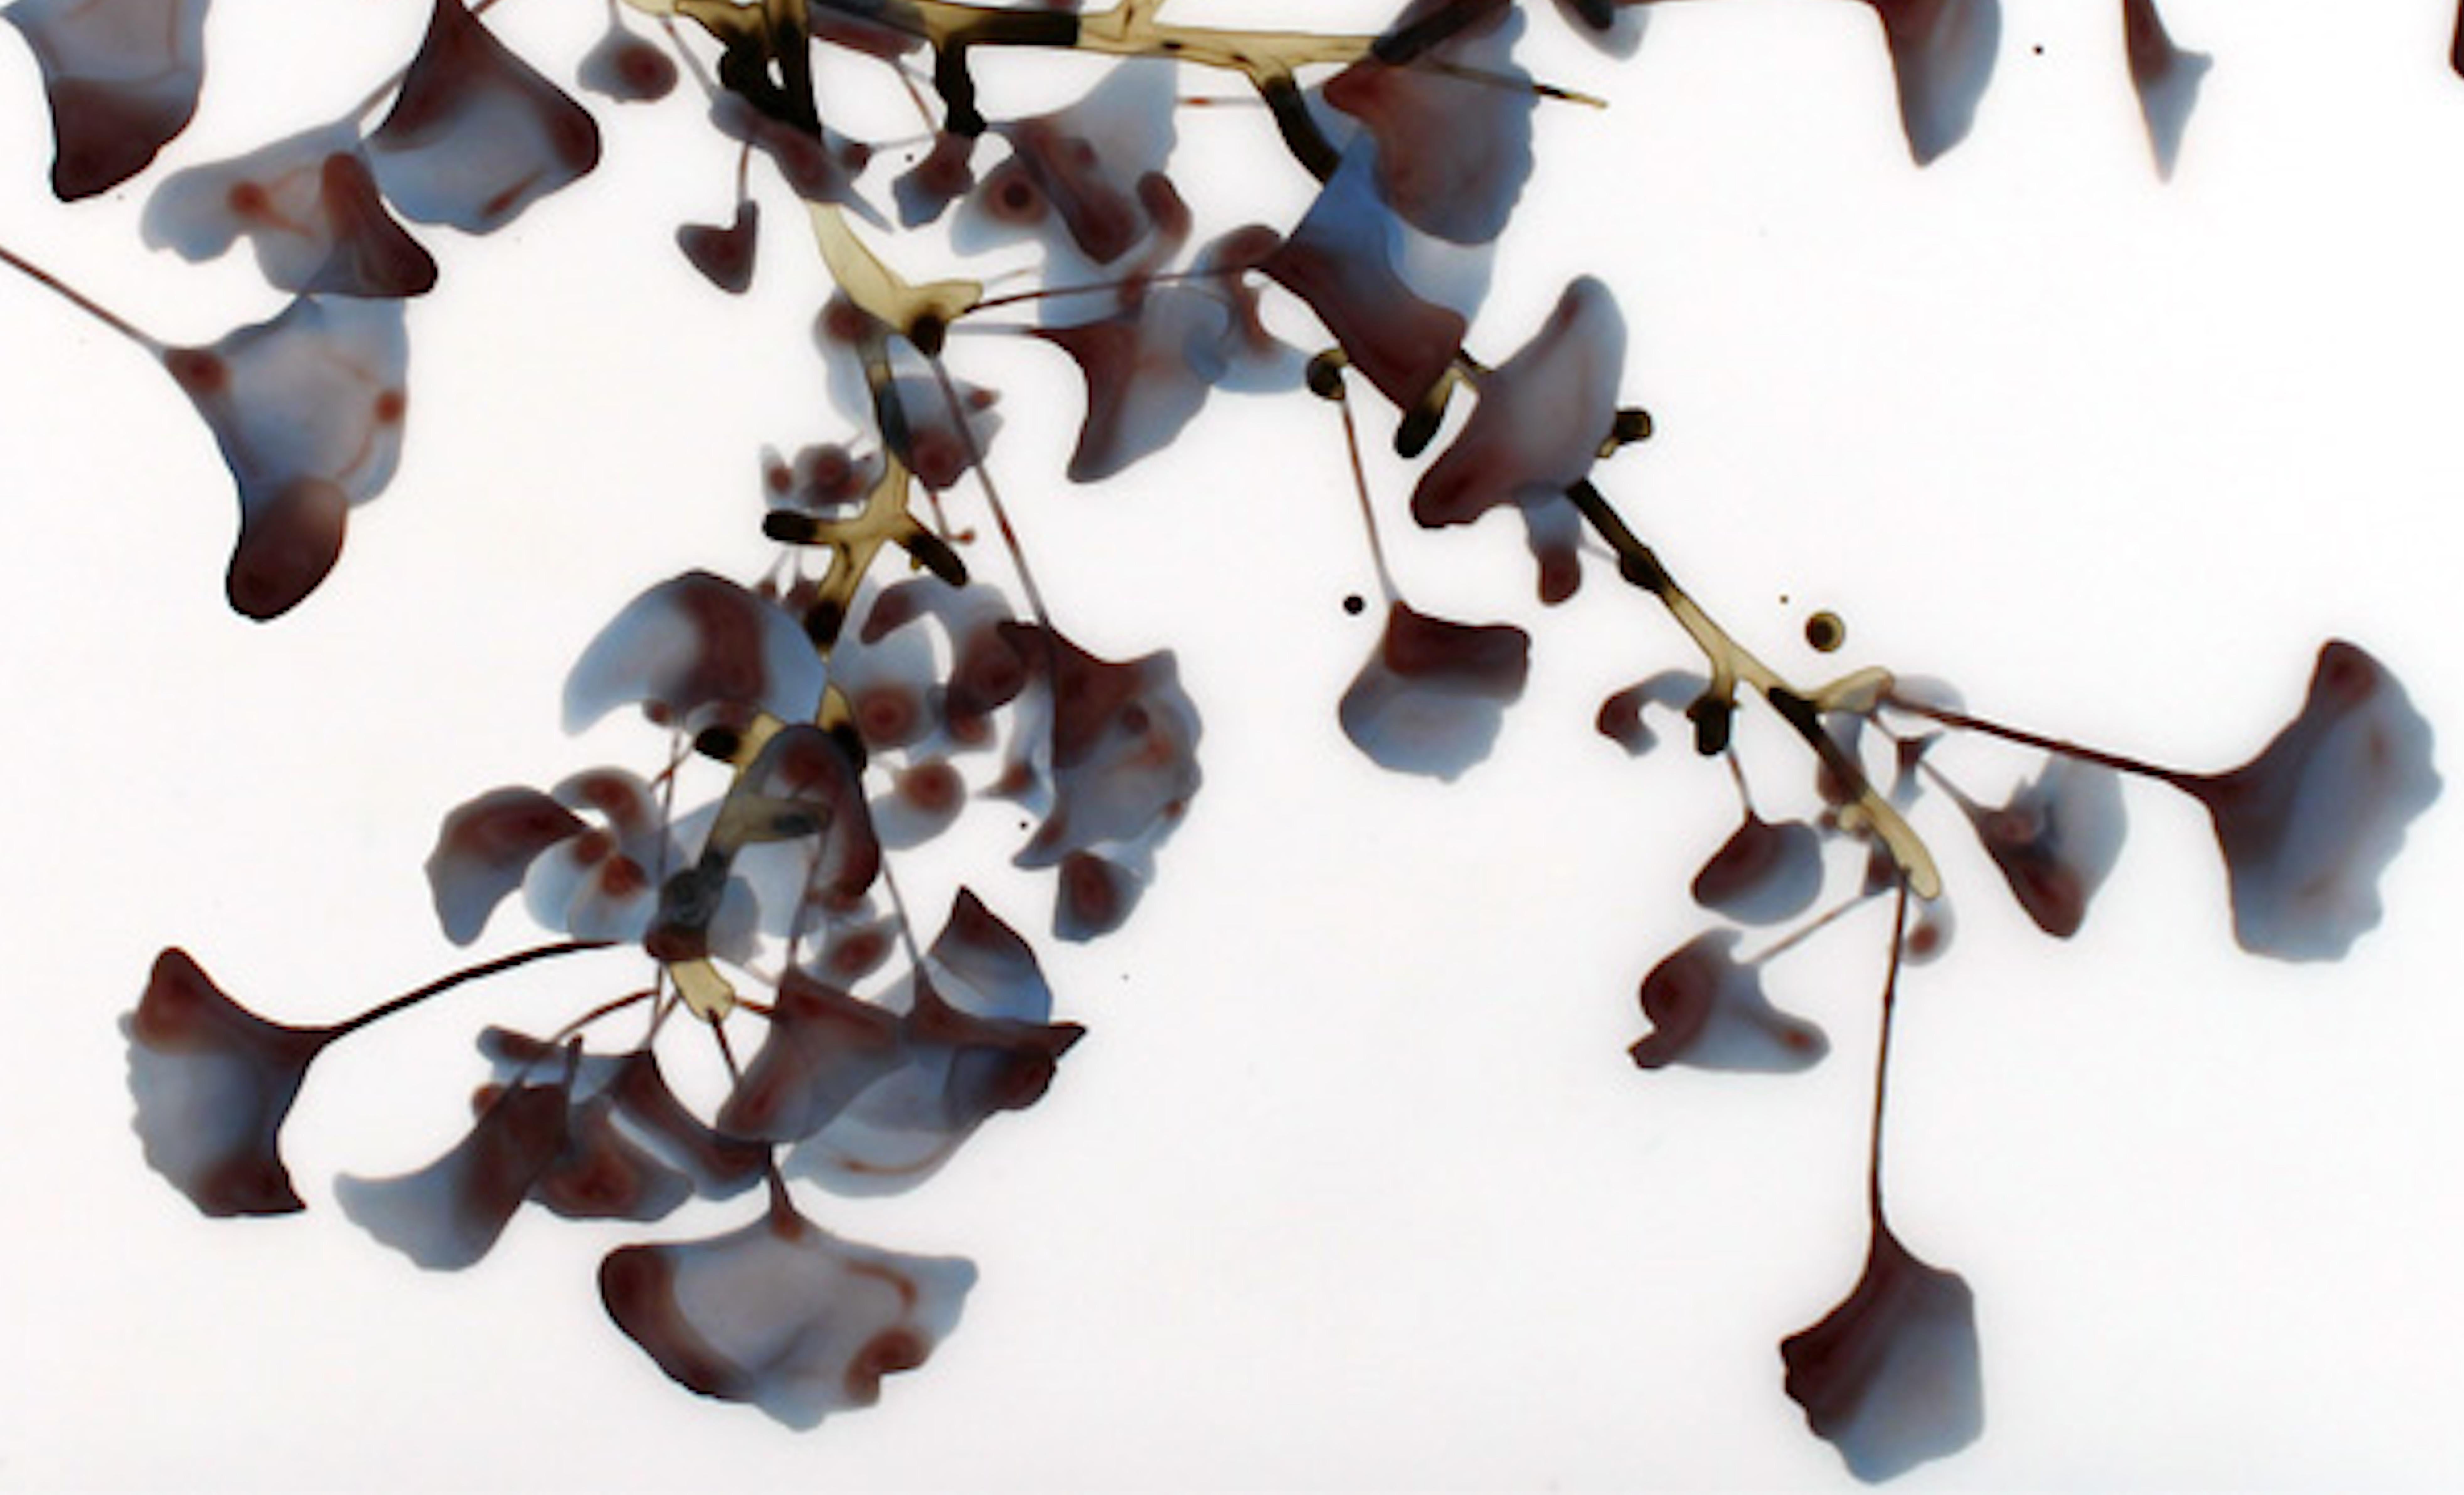 Gingko leaves in brown and blue on delicate light brown and olive branches are striking against the pristine white background of this horizontal painting in acrylic on Mylar.

Battenfield's works on Mylar require mounting and bracing prior to